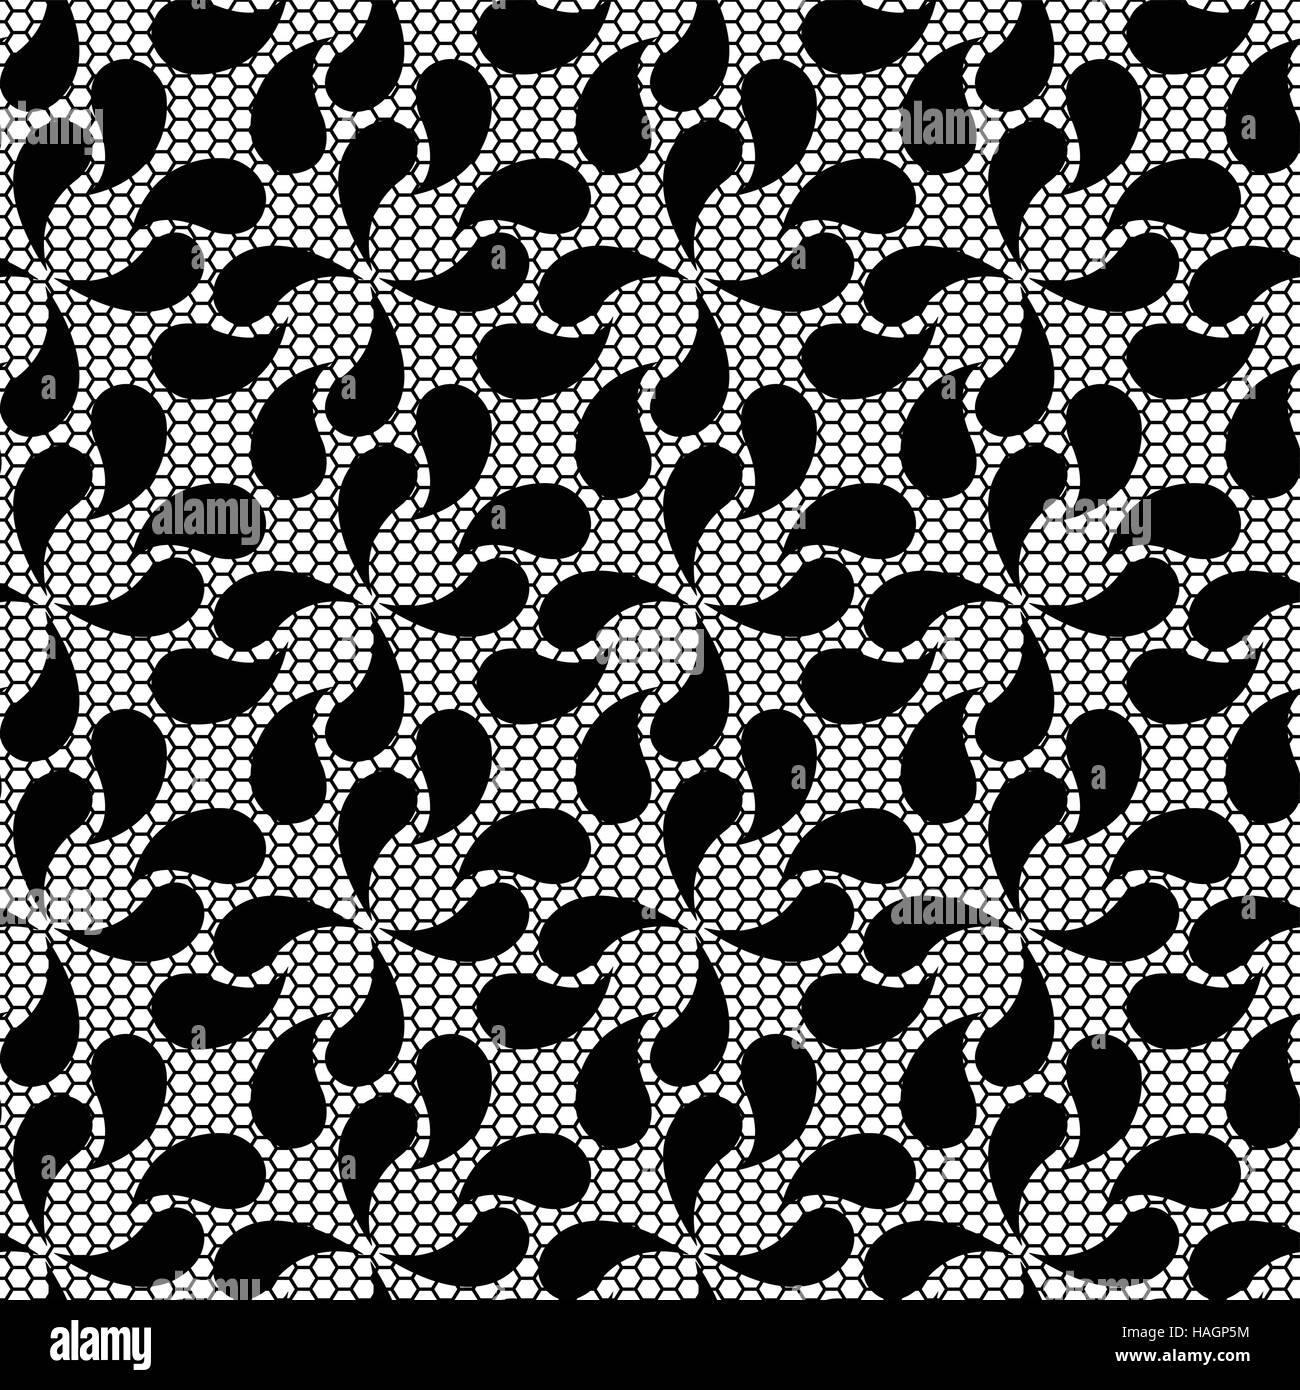 Seamless black lace pattern on white background Stock Vector Image